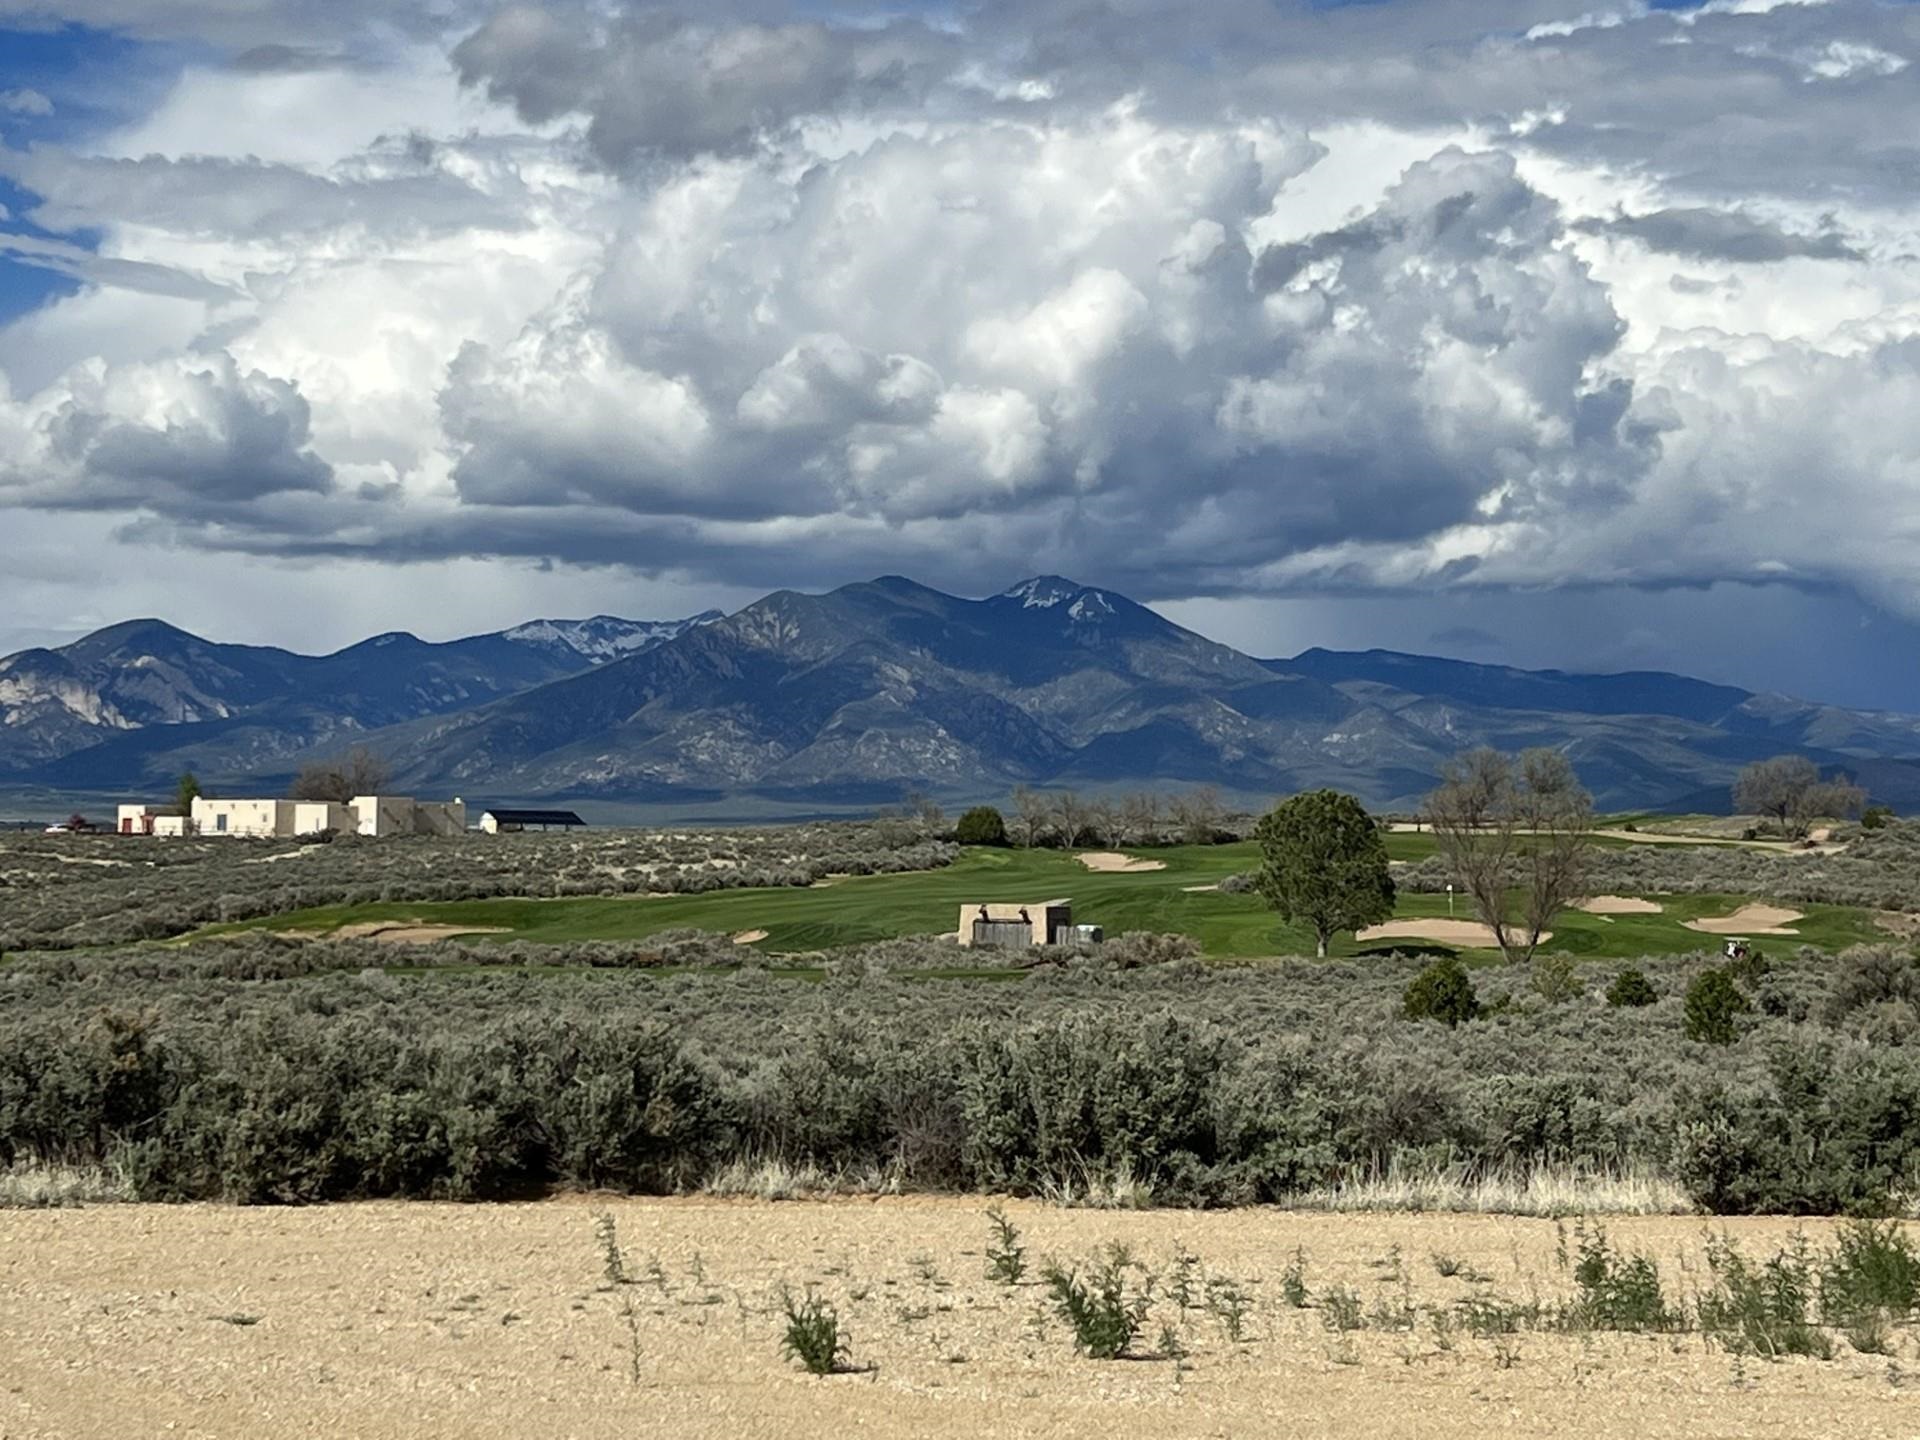 Special 3 acre parcel of land located next to Taos Golf Course and Country Club with breathtaking views. Great Location and easy access. Just minutes from Taos Plaza.